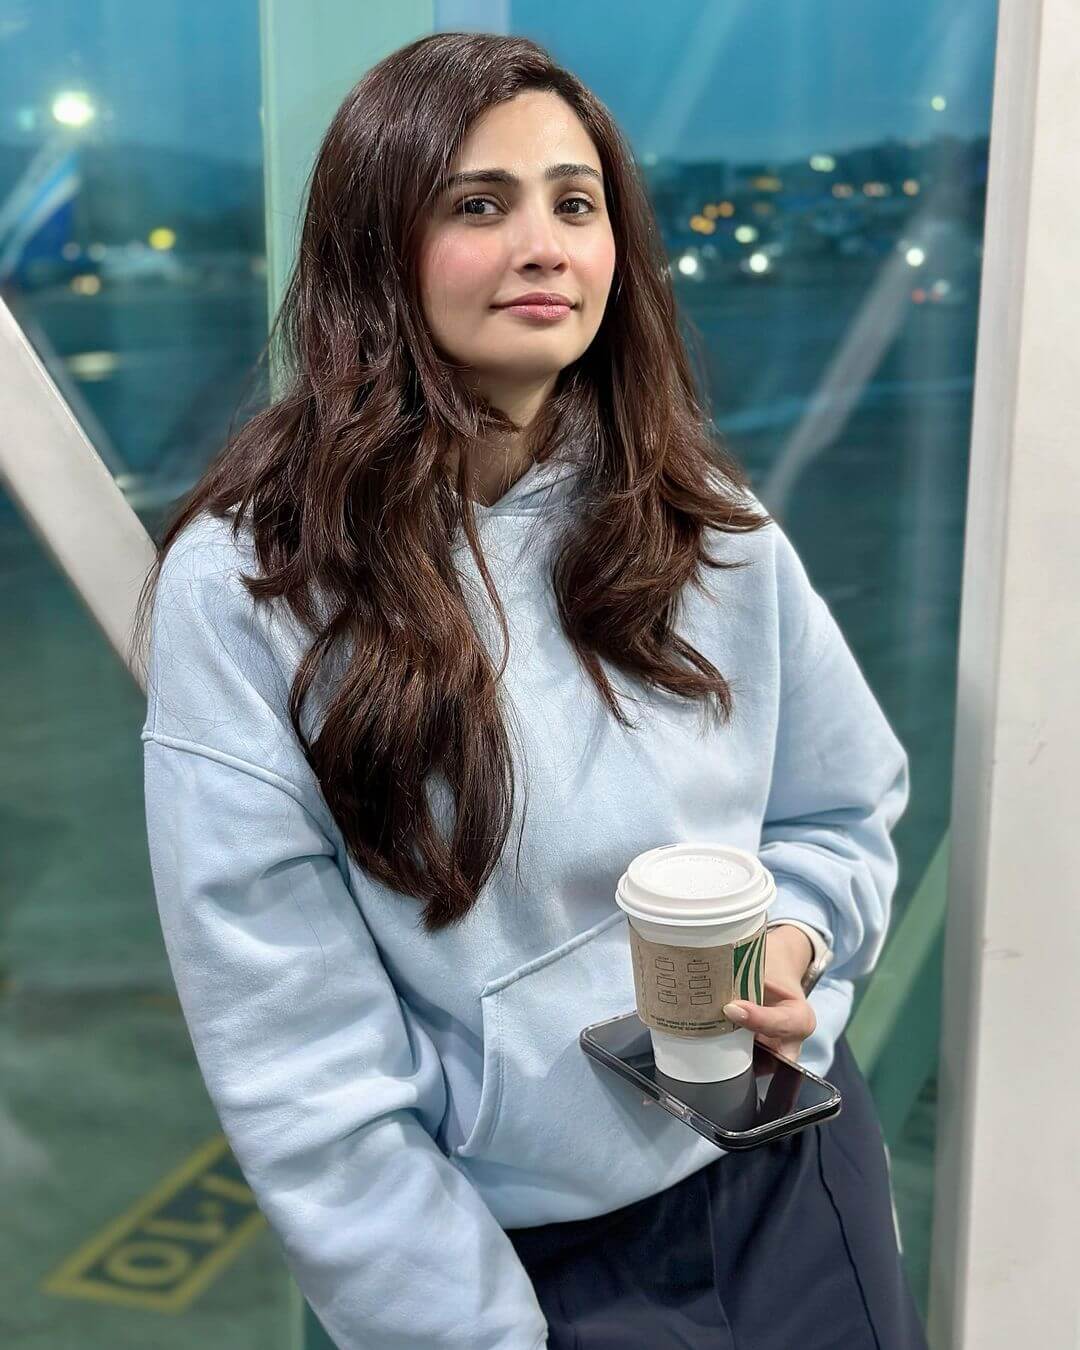 Trendy And Amazing Bollywood Fashion Daisy Shah's Cute Look In Comfy Blue Hoodie